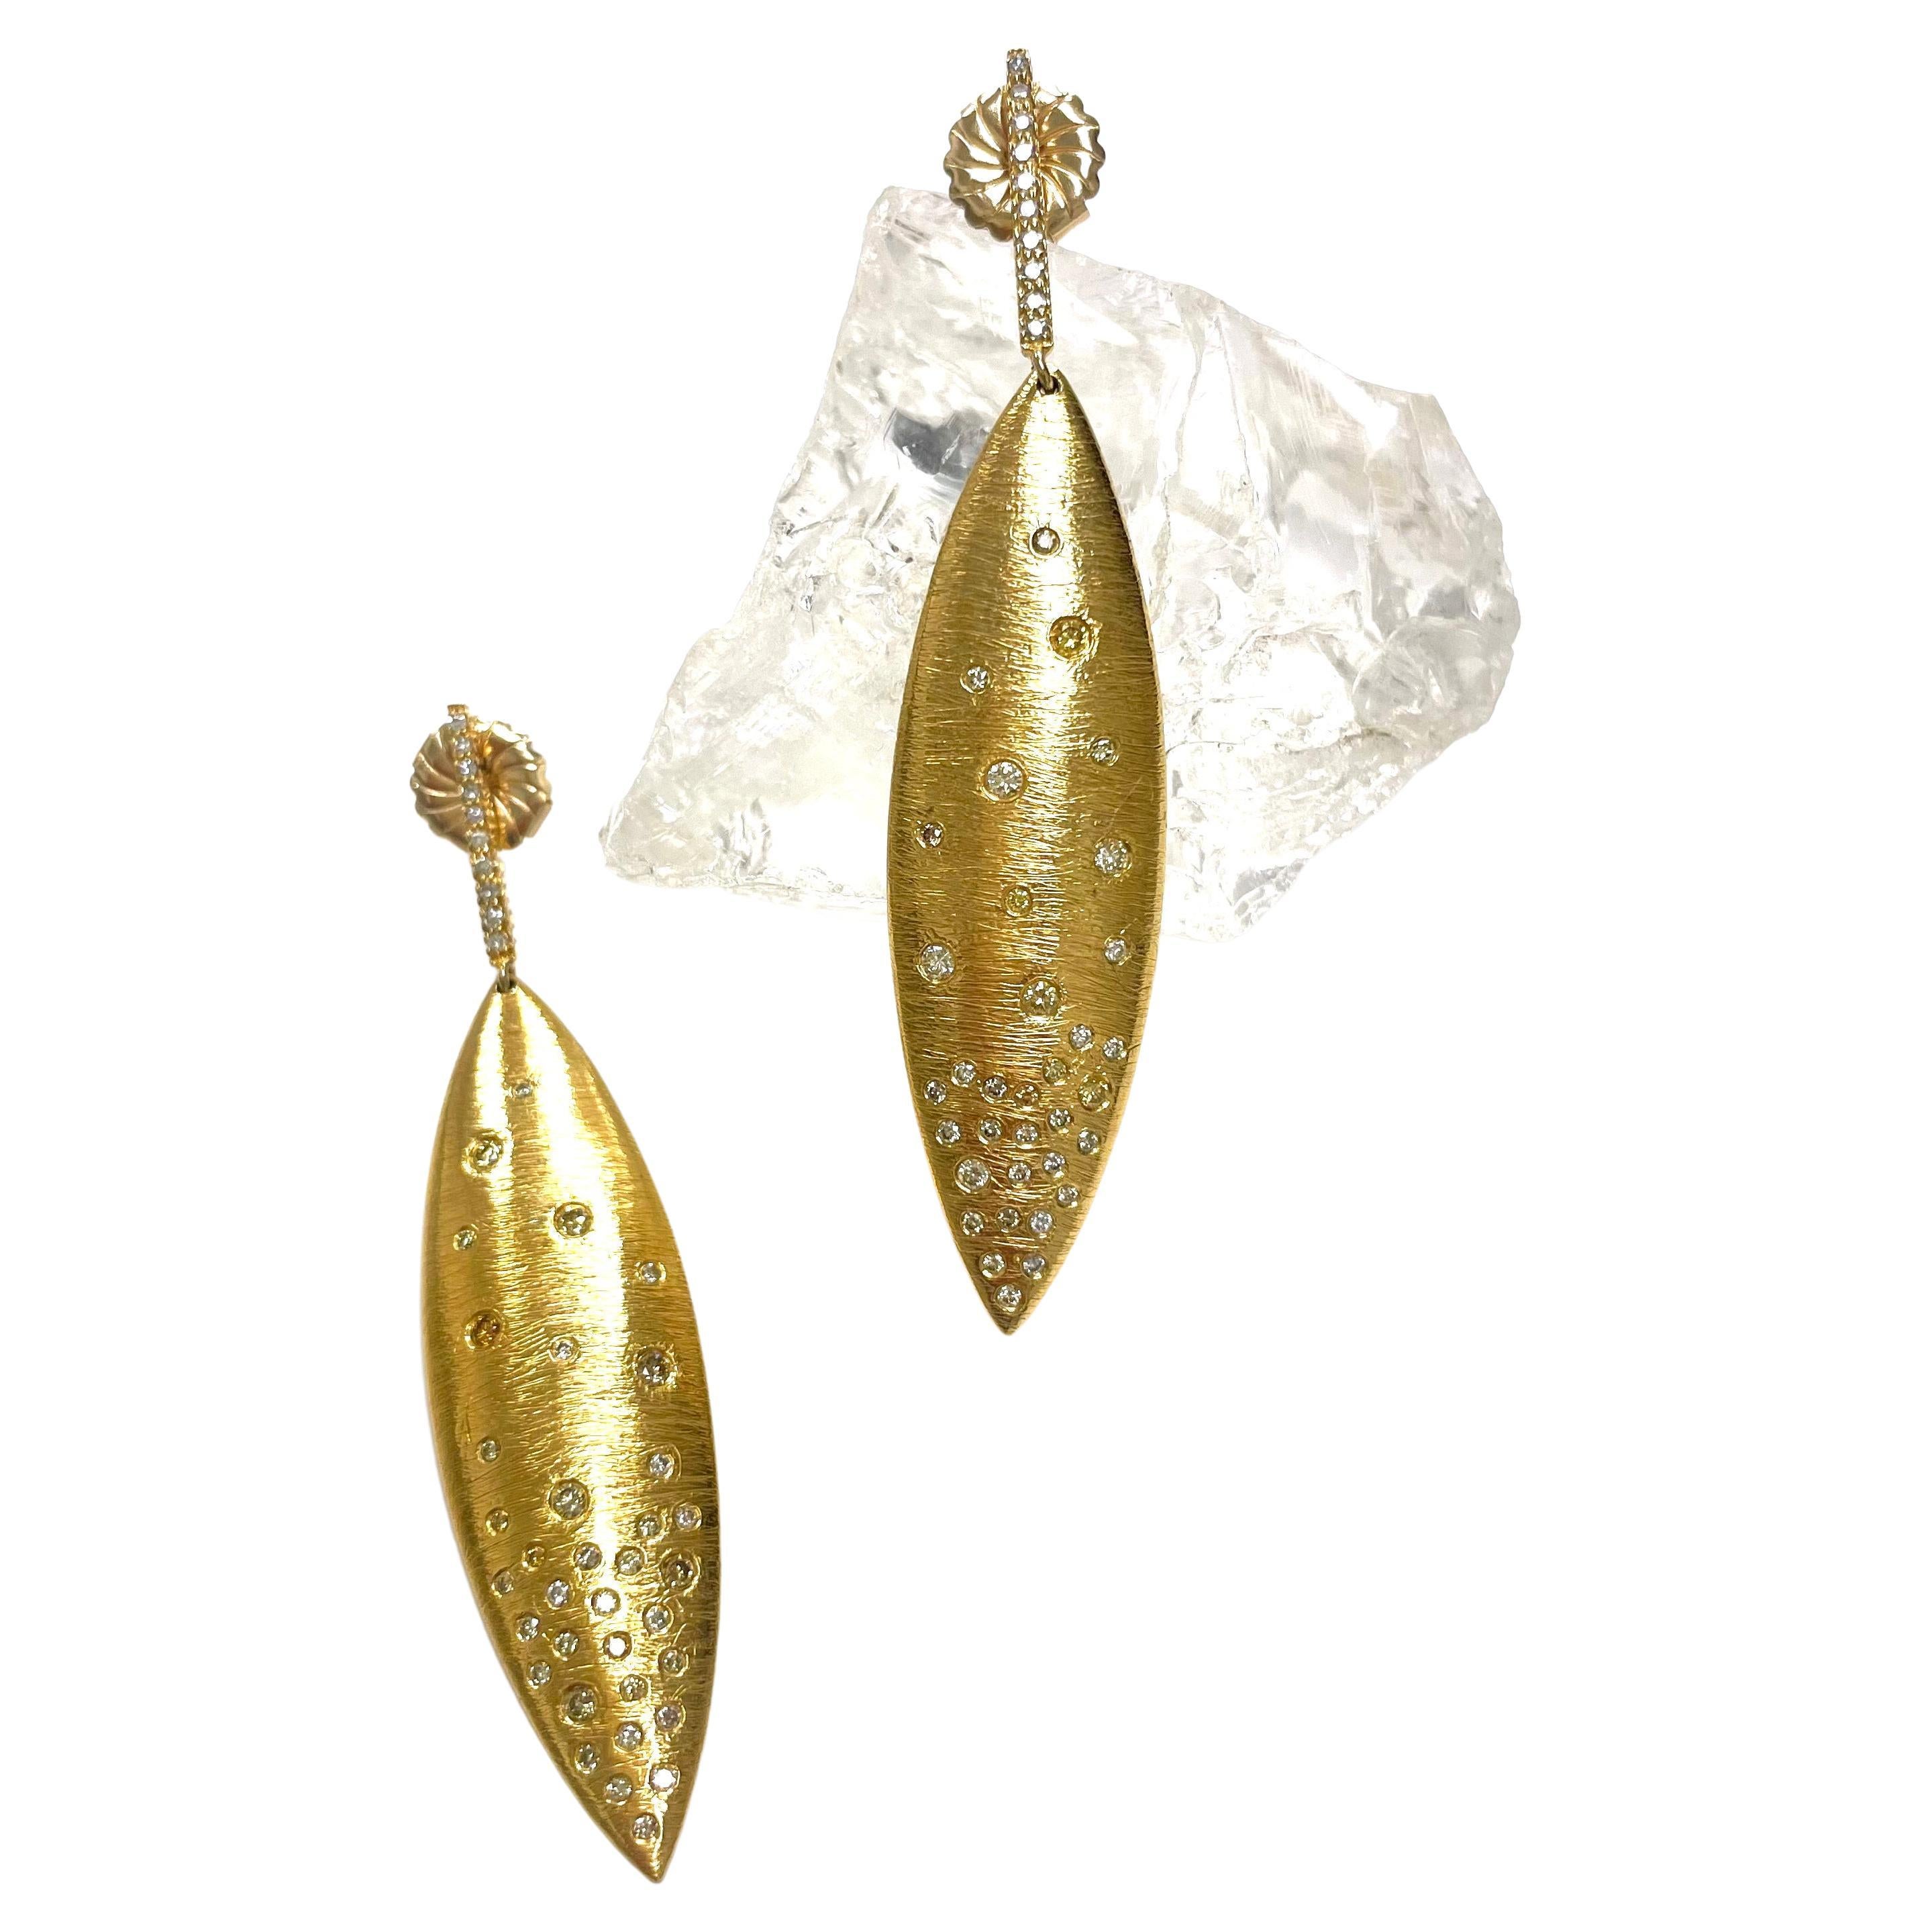 Description
Elegant textured 14k gold vermeil statement earrings, embellished with an asterism of diamonds which creates a beautiful and mystical effect. 
Item #E3080

Materials and Weight
Diamonds 1.31cts
Vermeil plated sterling silver
14k yellow